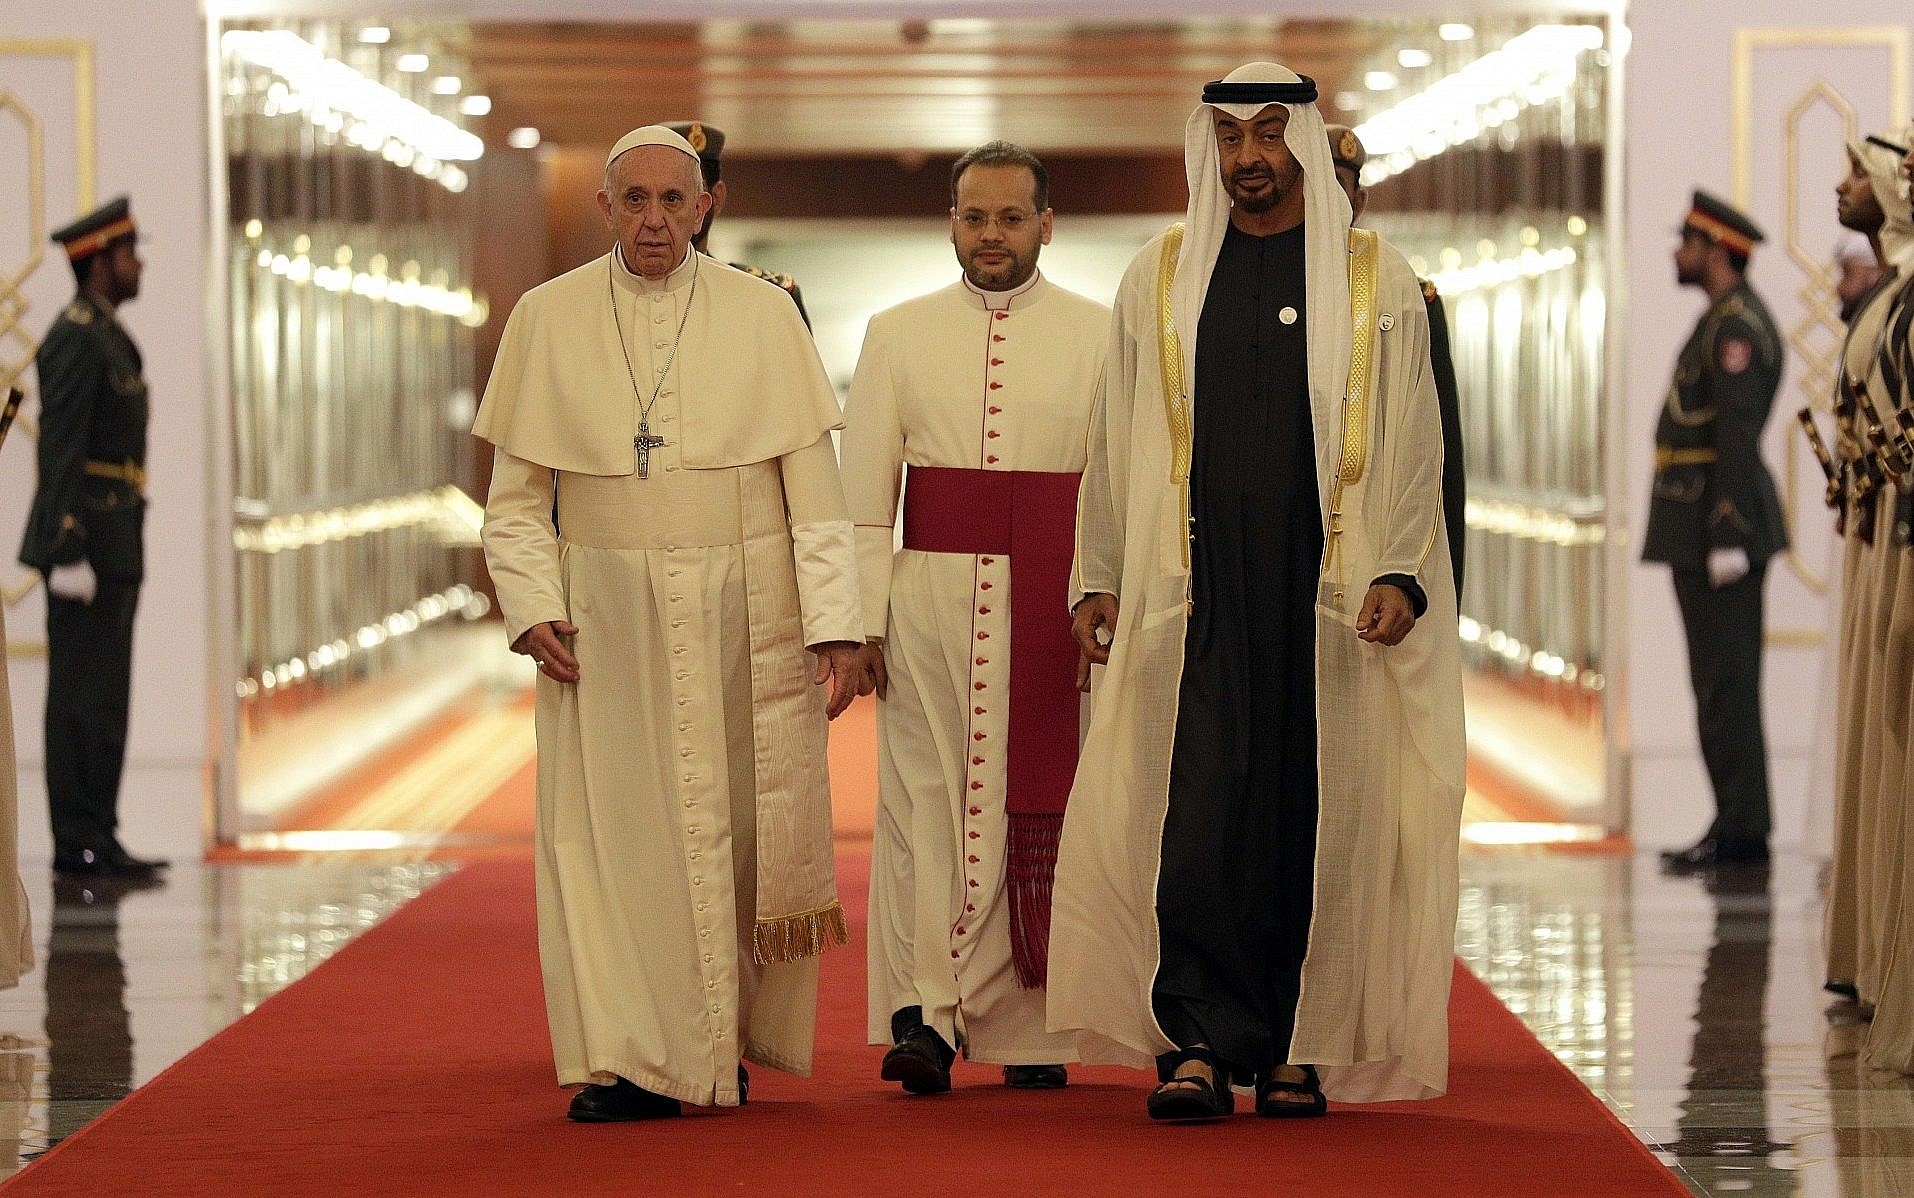 Pope Francis arrives in UAE for historic trip to Gulf | The Times ...